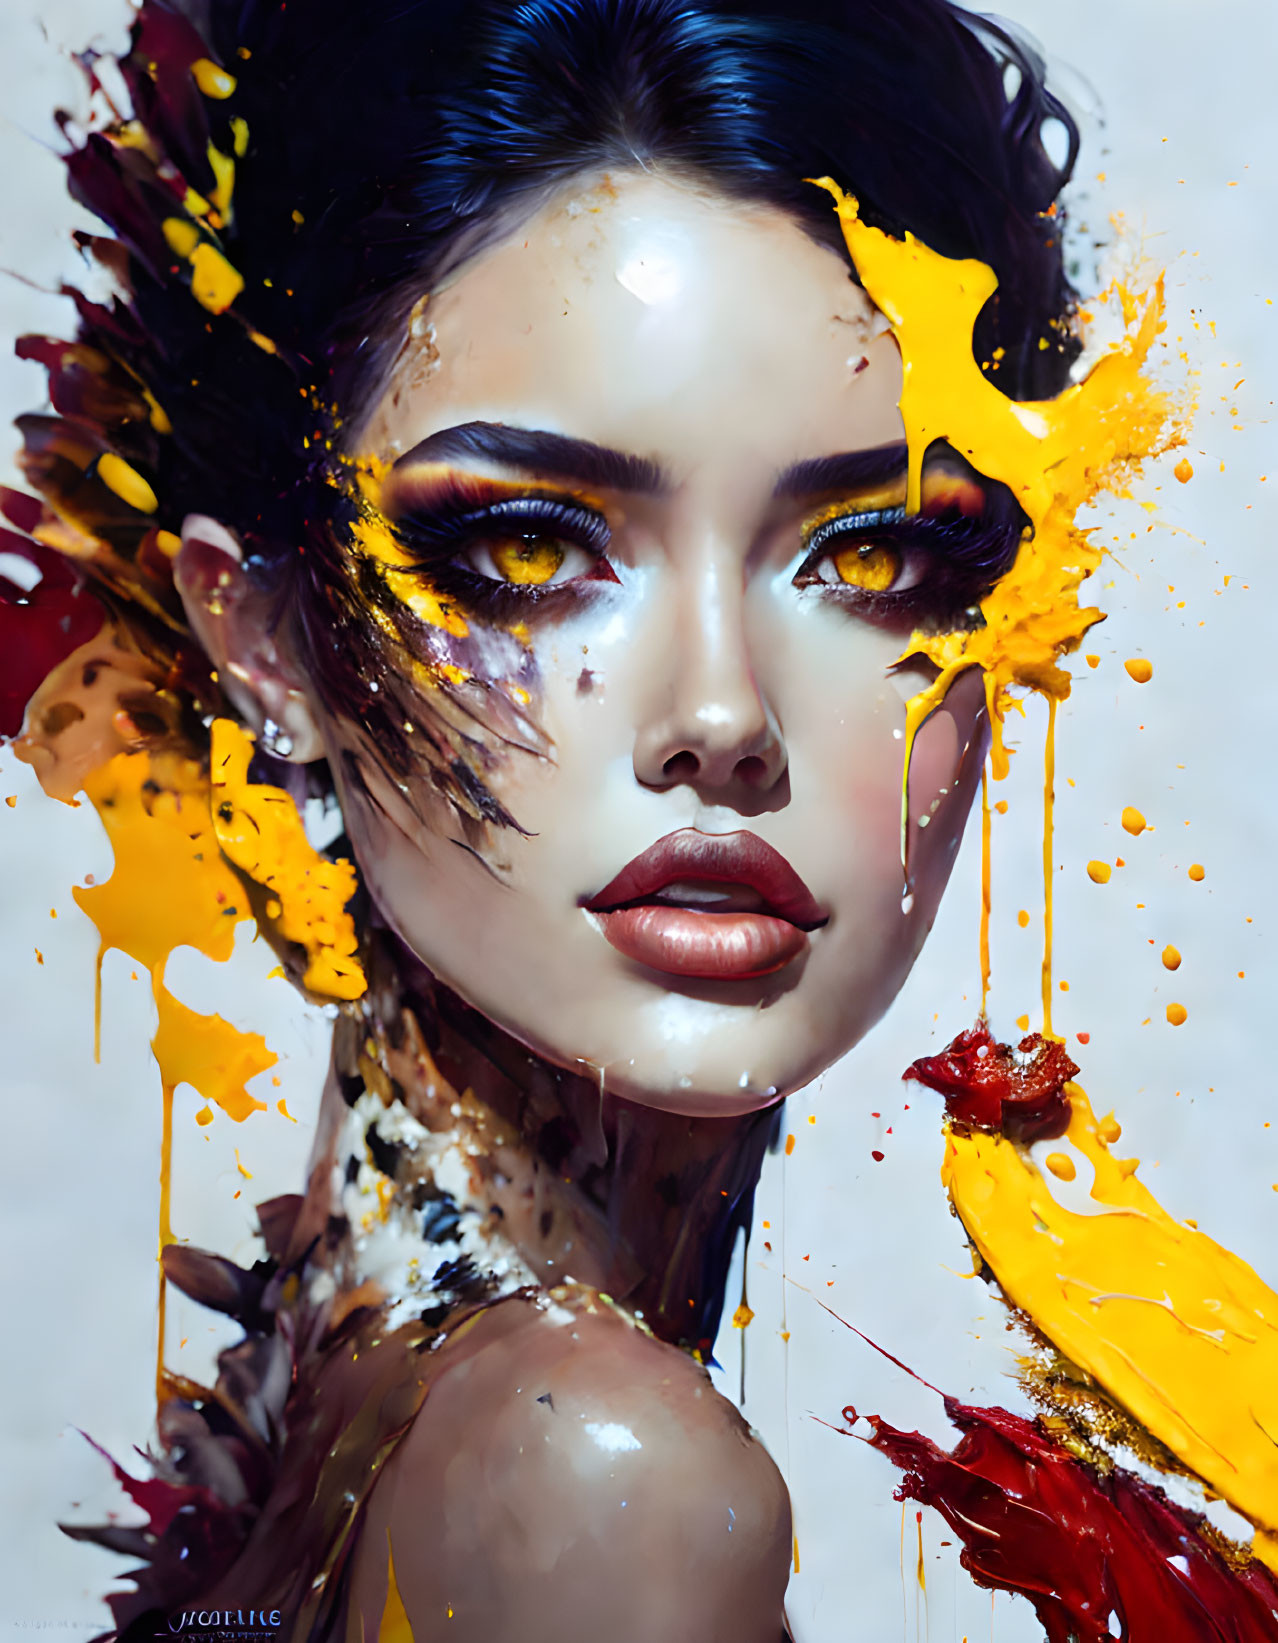 Vivid abstract digital portrait with dramatic makeup and colorful paint splashes